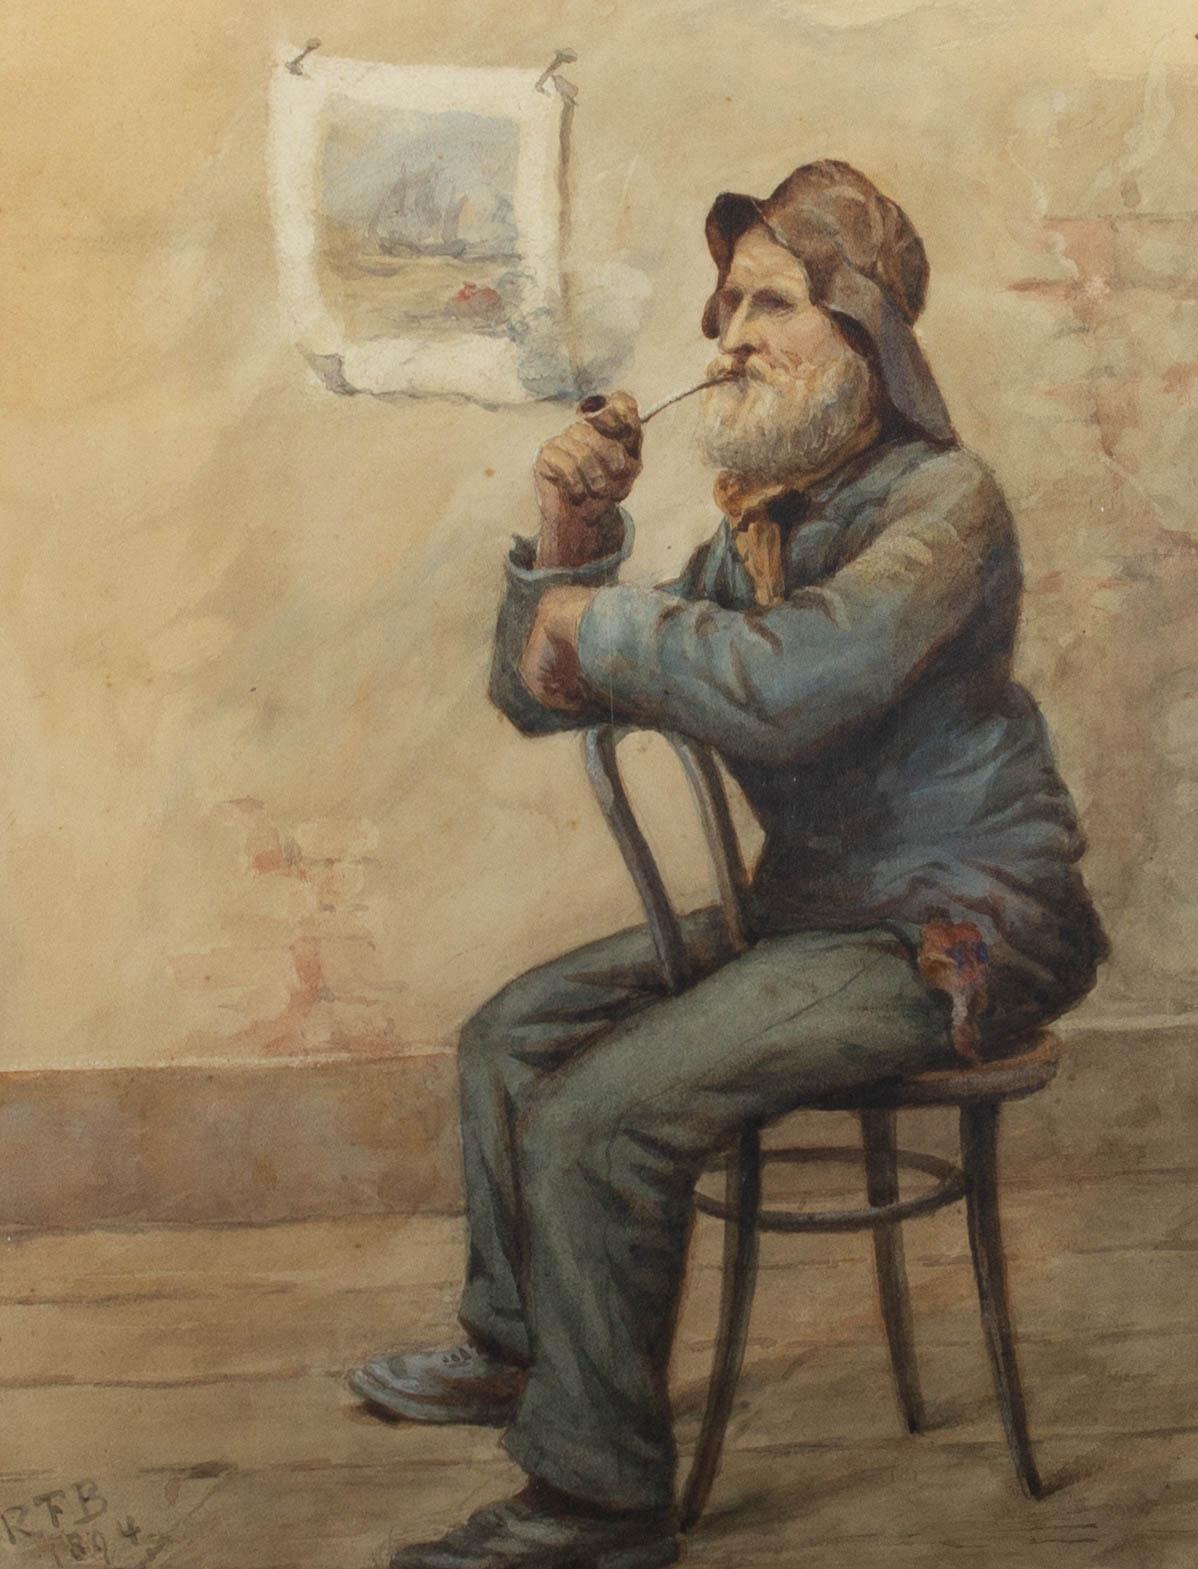 This portrait is of a fisherman sat on a wooden chair smoking his pipe. The fine detail of the painting shows the textures of the man's rain hat and heavy jacket, depicting the nature his work at sea. In the background we are shown a pinned up